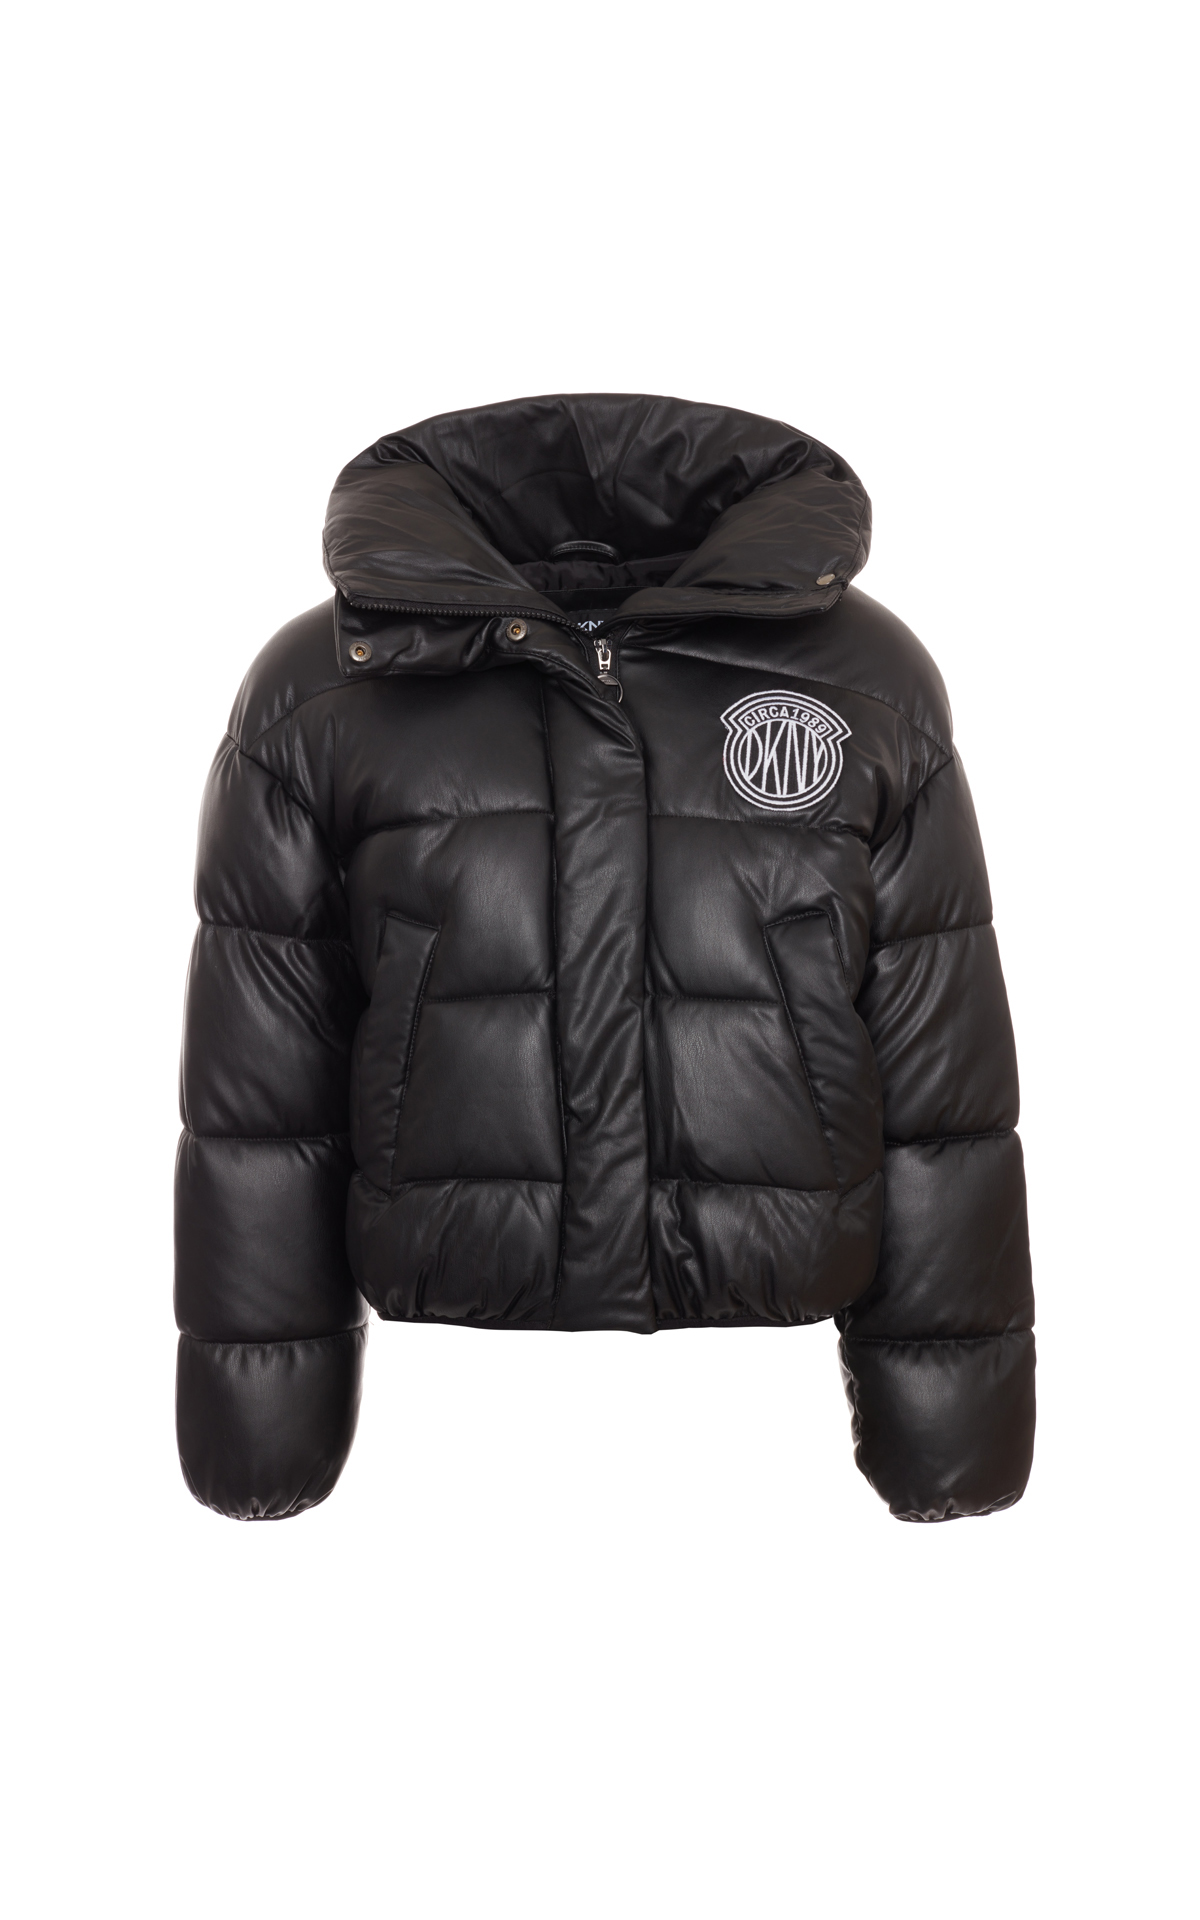 DKNY Logo puffer from Bicester Village